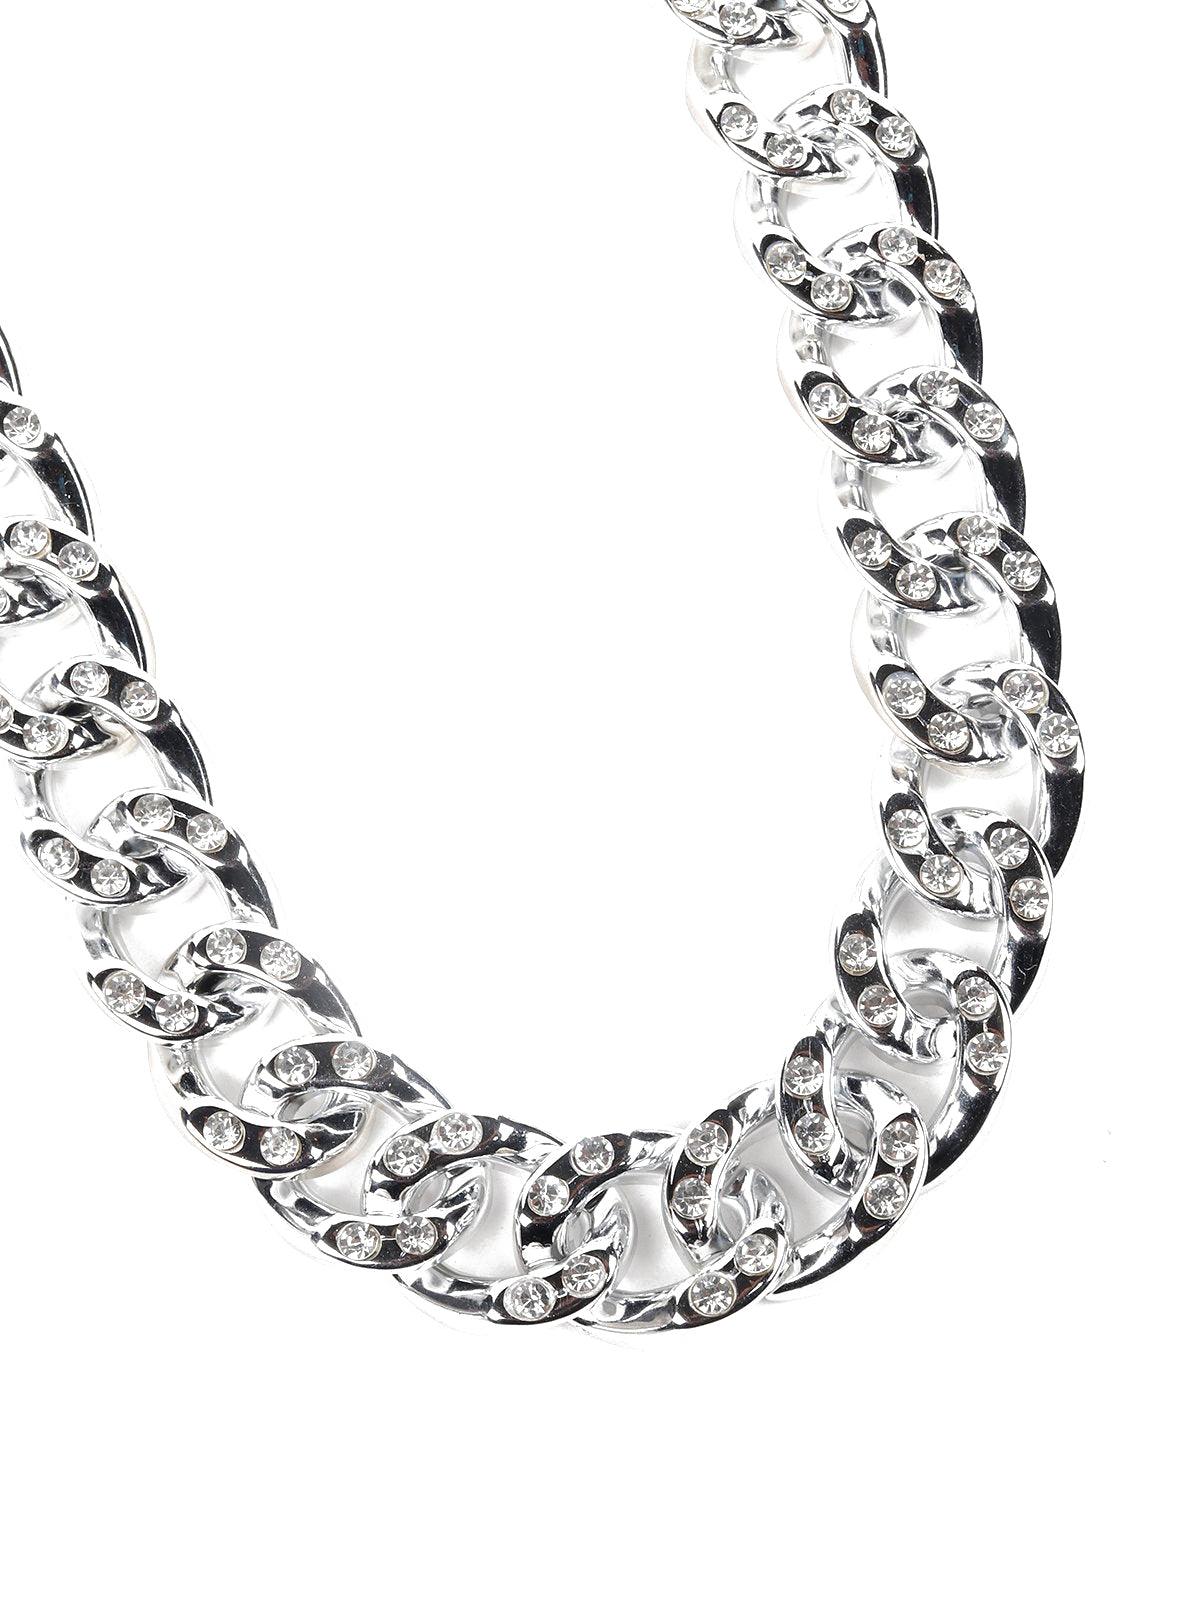 Women's Silver-Tone Chunky Interlinked Chain Necklace - Odette